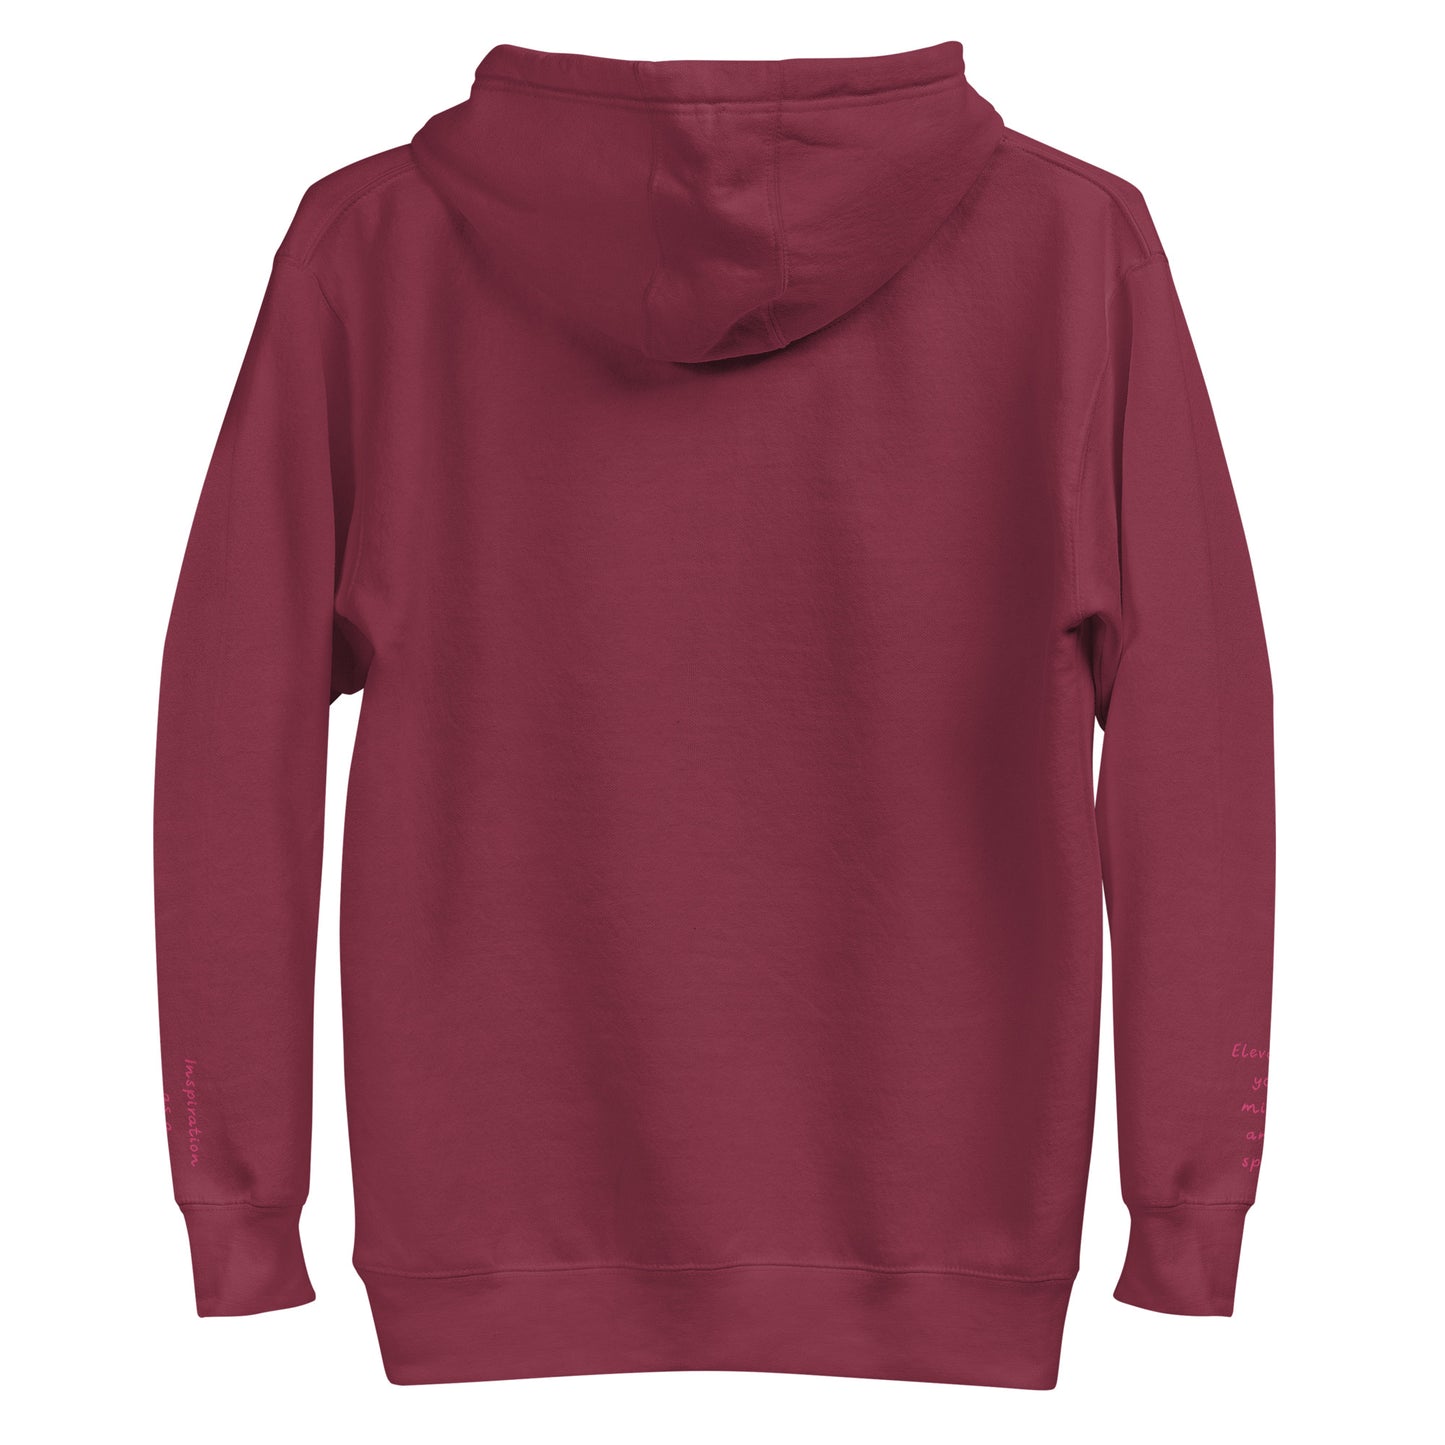 Exaltia - Classic Cotton: Women's Hoodie - Inspiration as a driving force